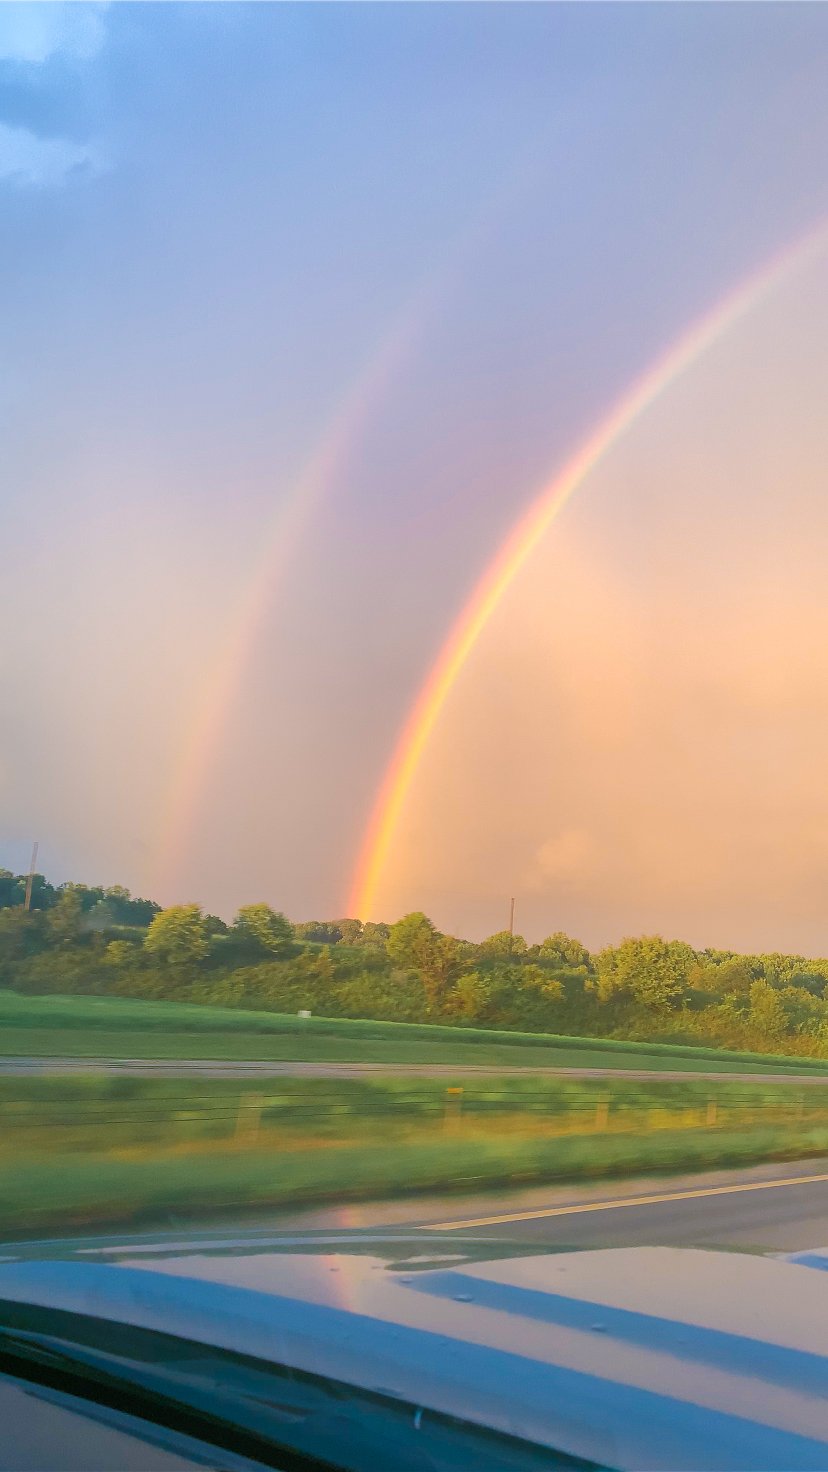 A full double rainbow guided us home